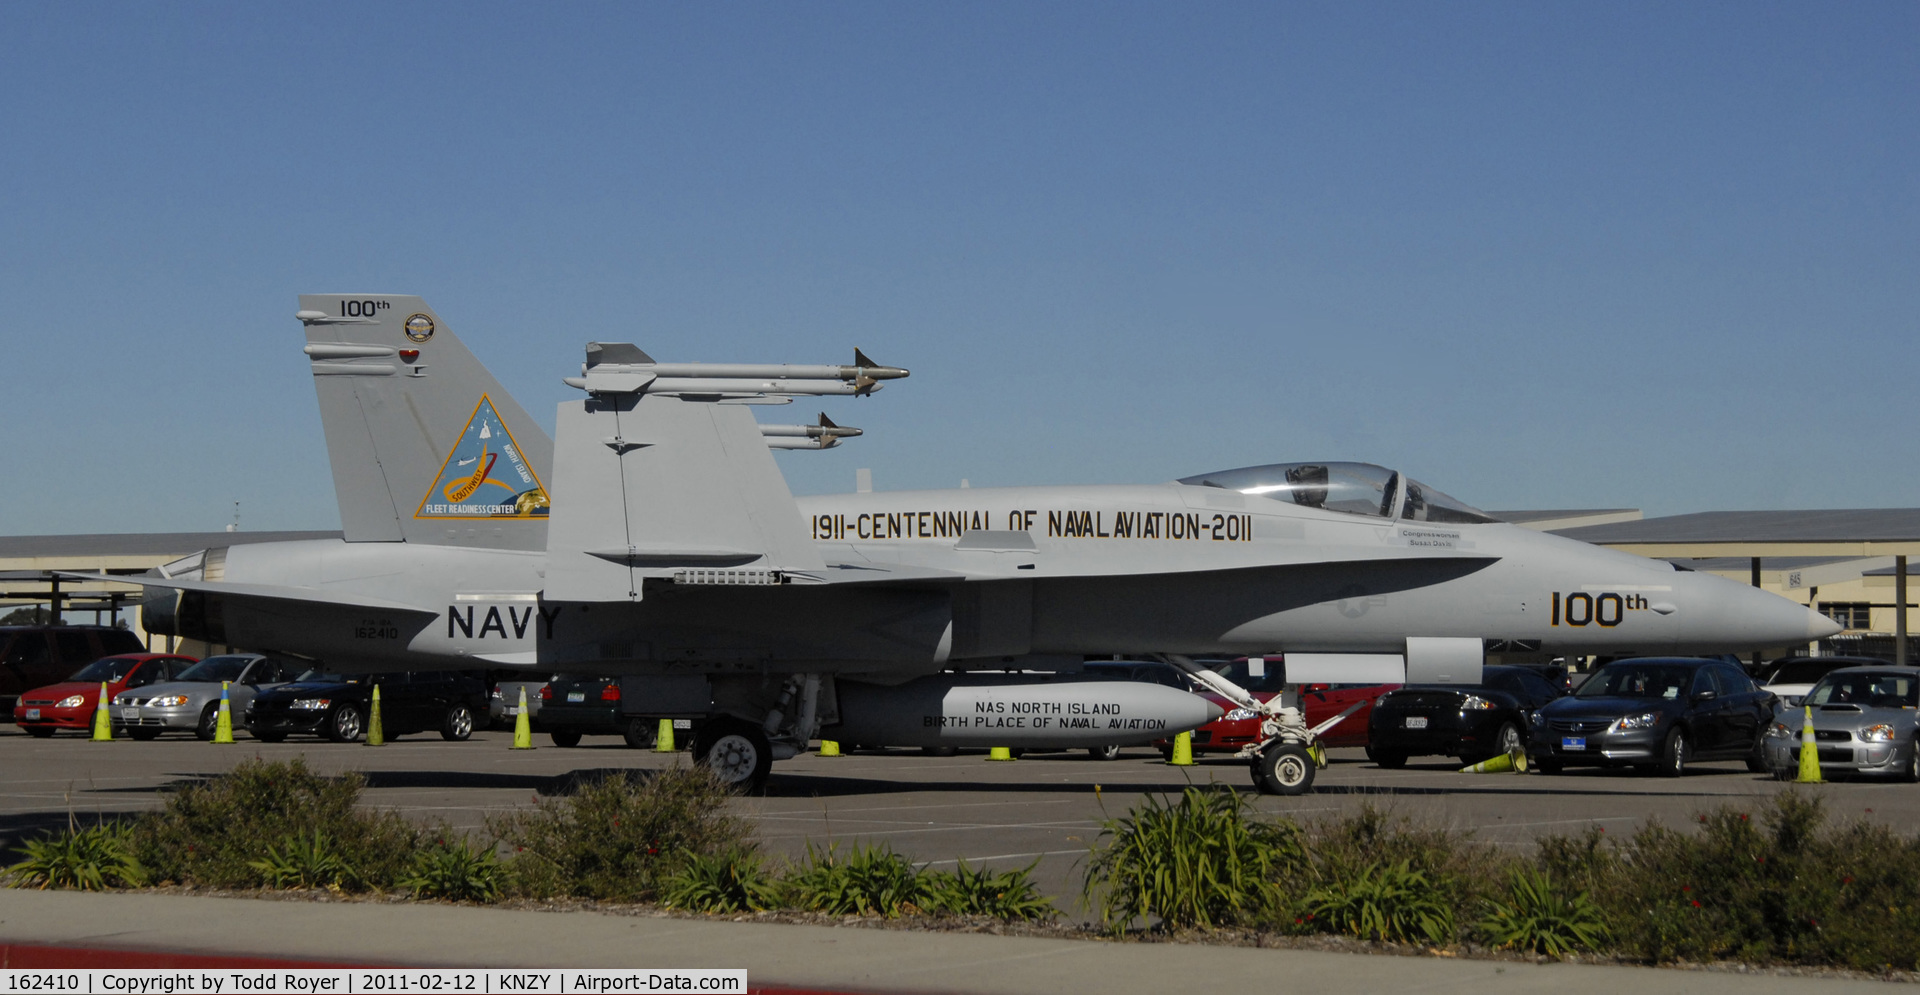 162410, McDonnell Douglas F/A-18A Hornet C/N 0242/A192, Special paint for the Centennial of Naval Aviation